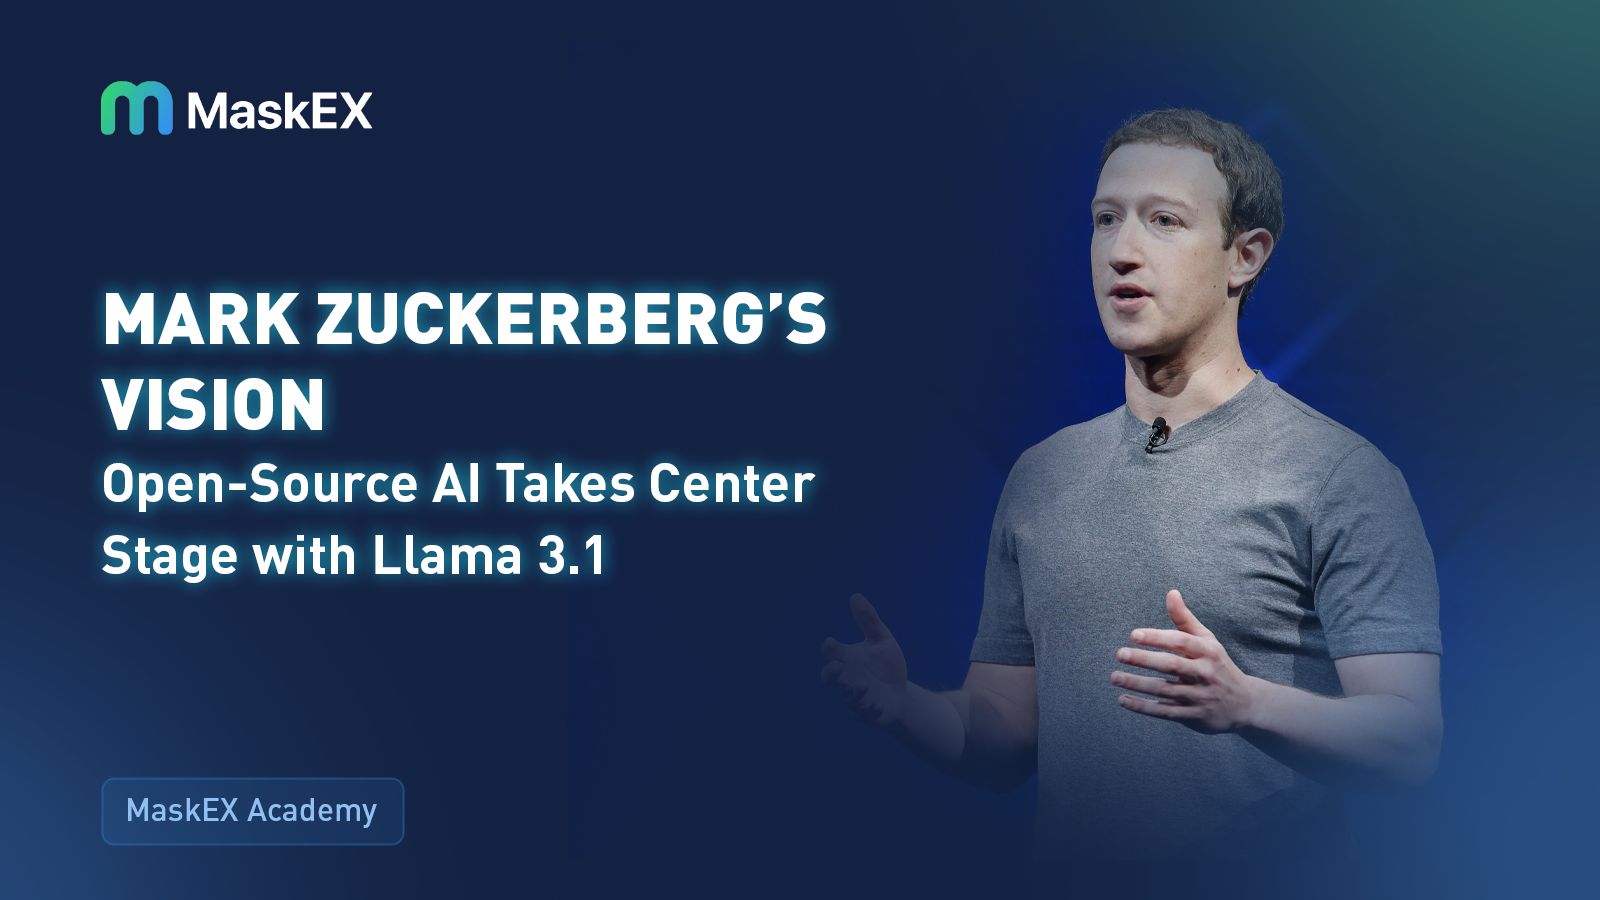 Mark Zuckerberg’s Vision: Open-Source AI Takes Center Stage with Llama 3.1